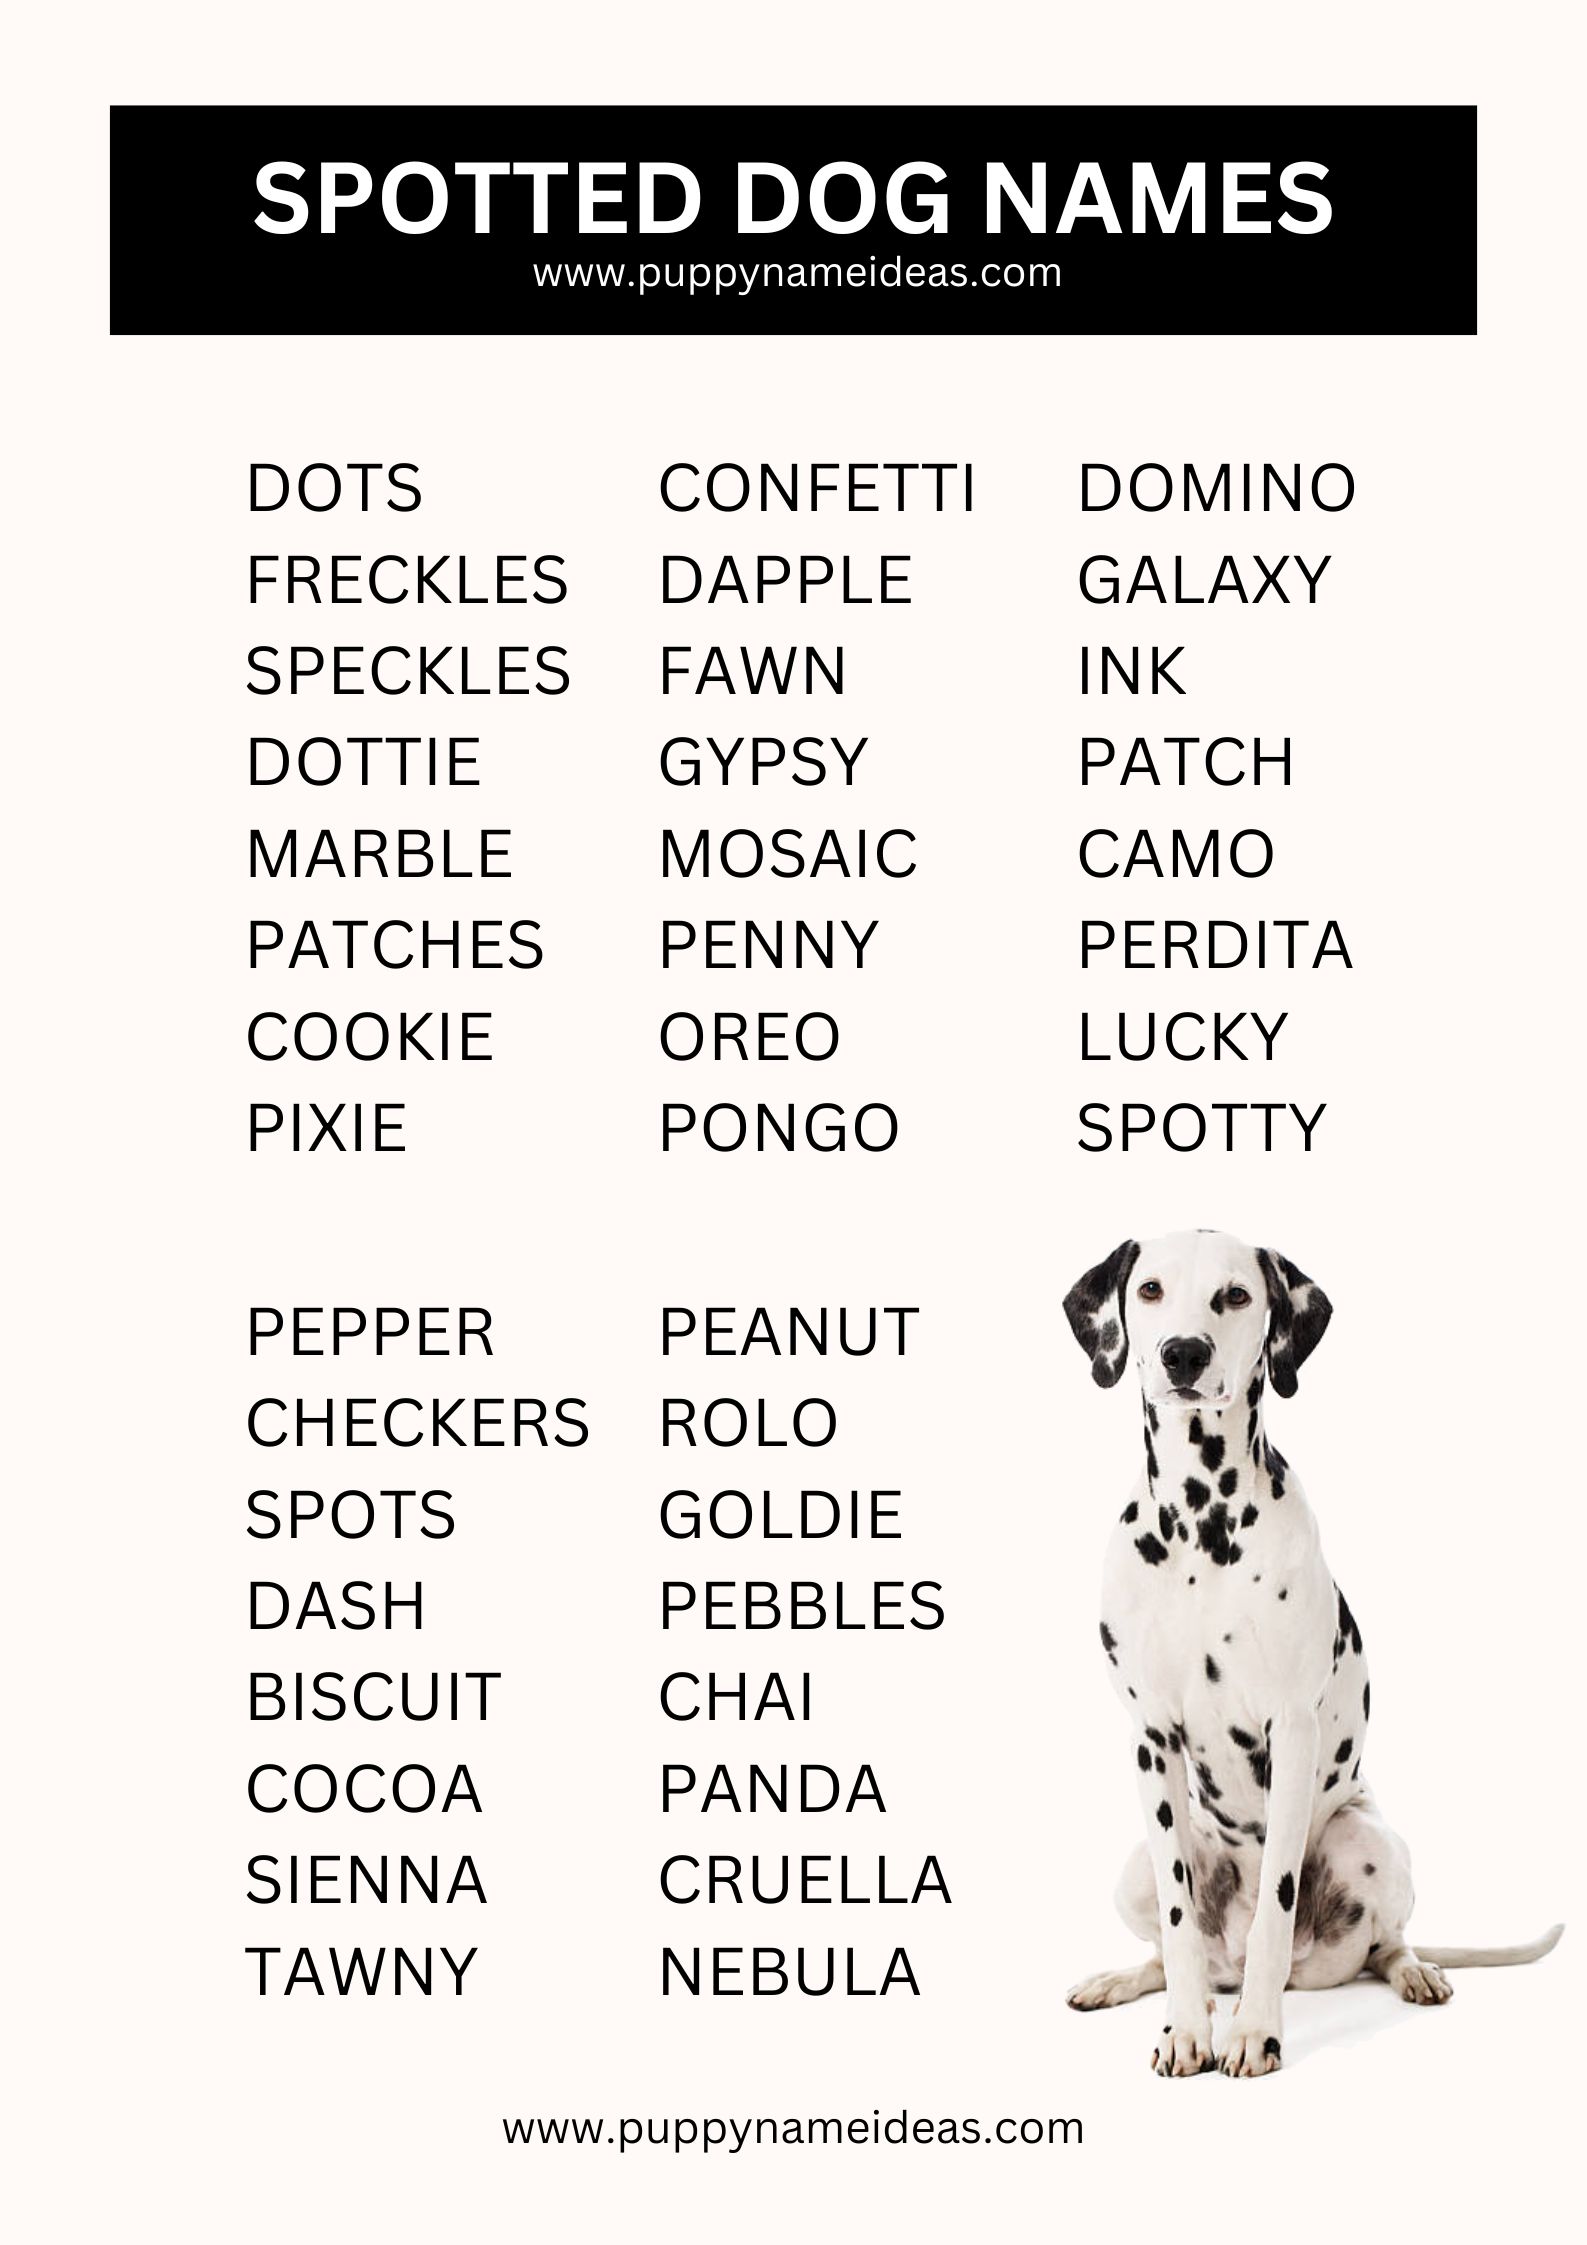 List Of Spotted Dog Names